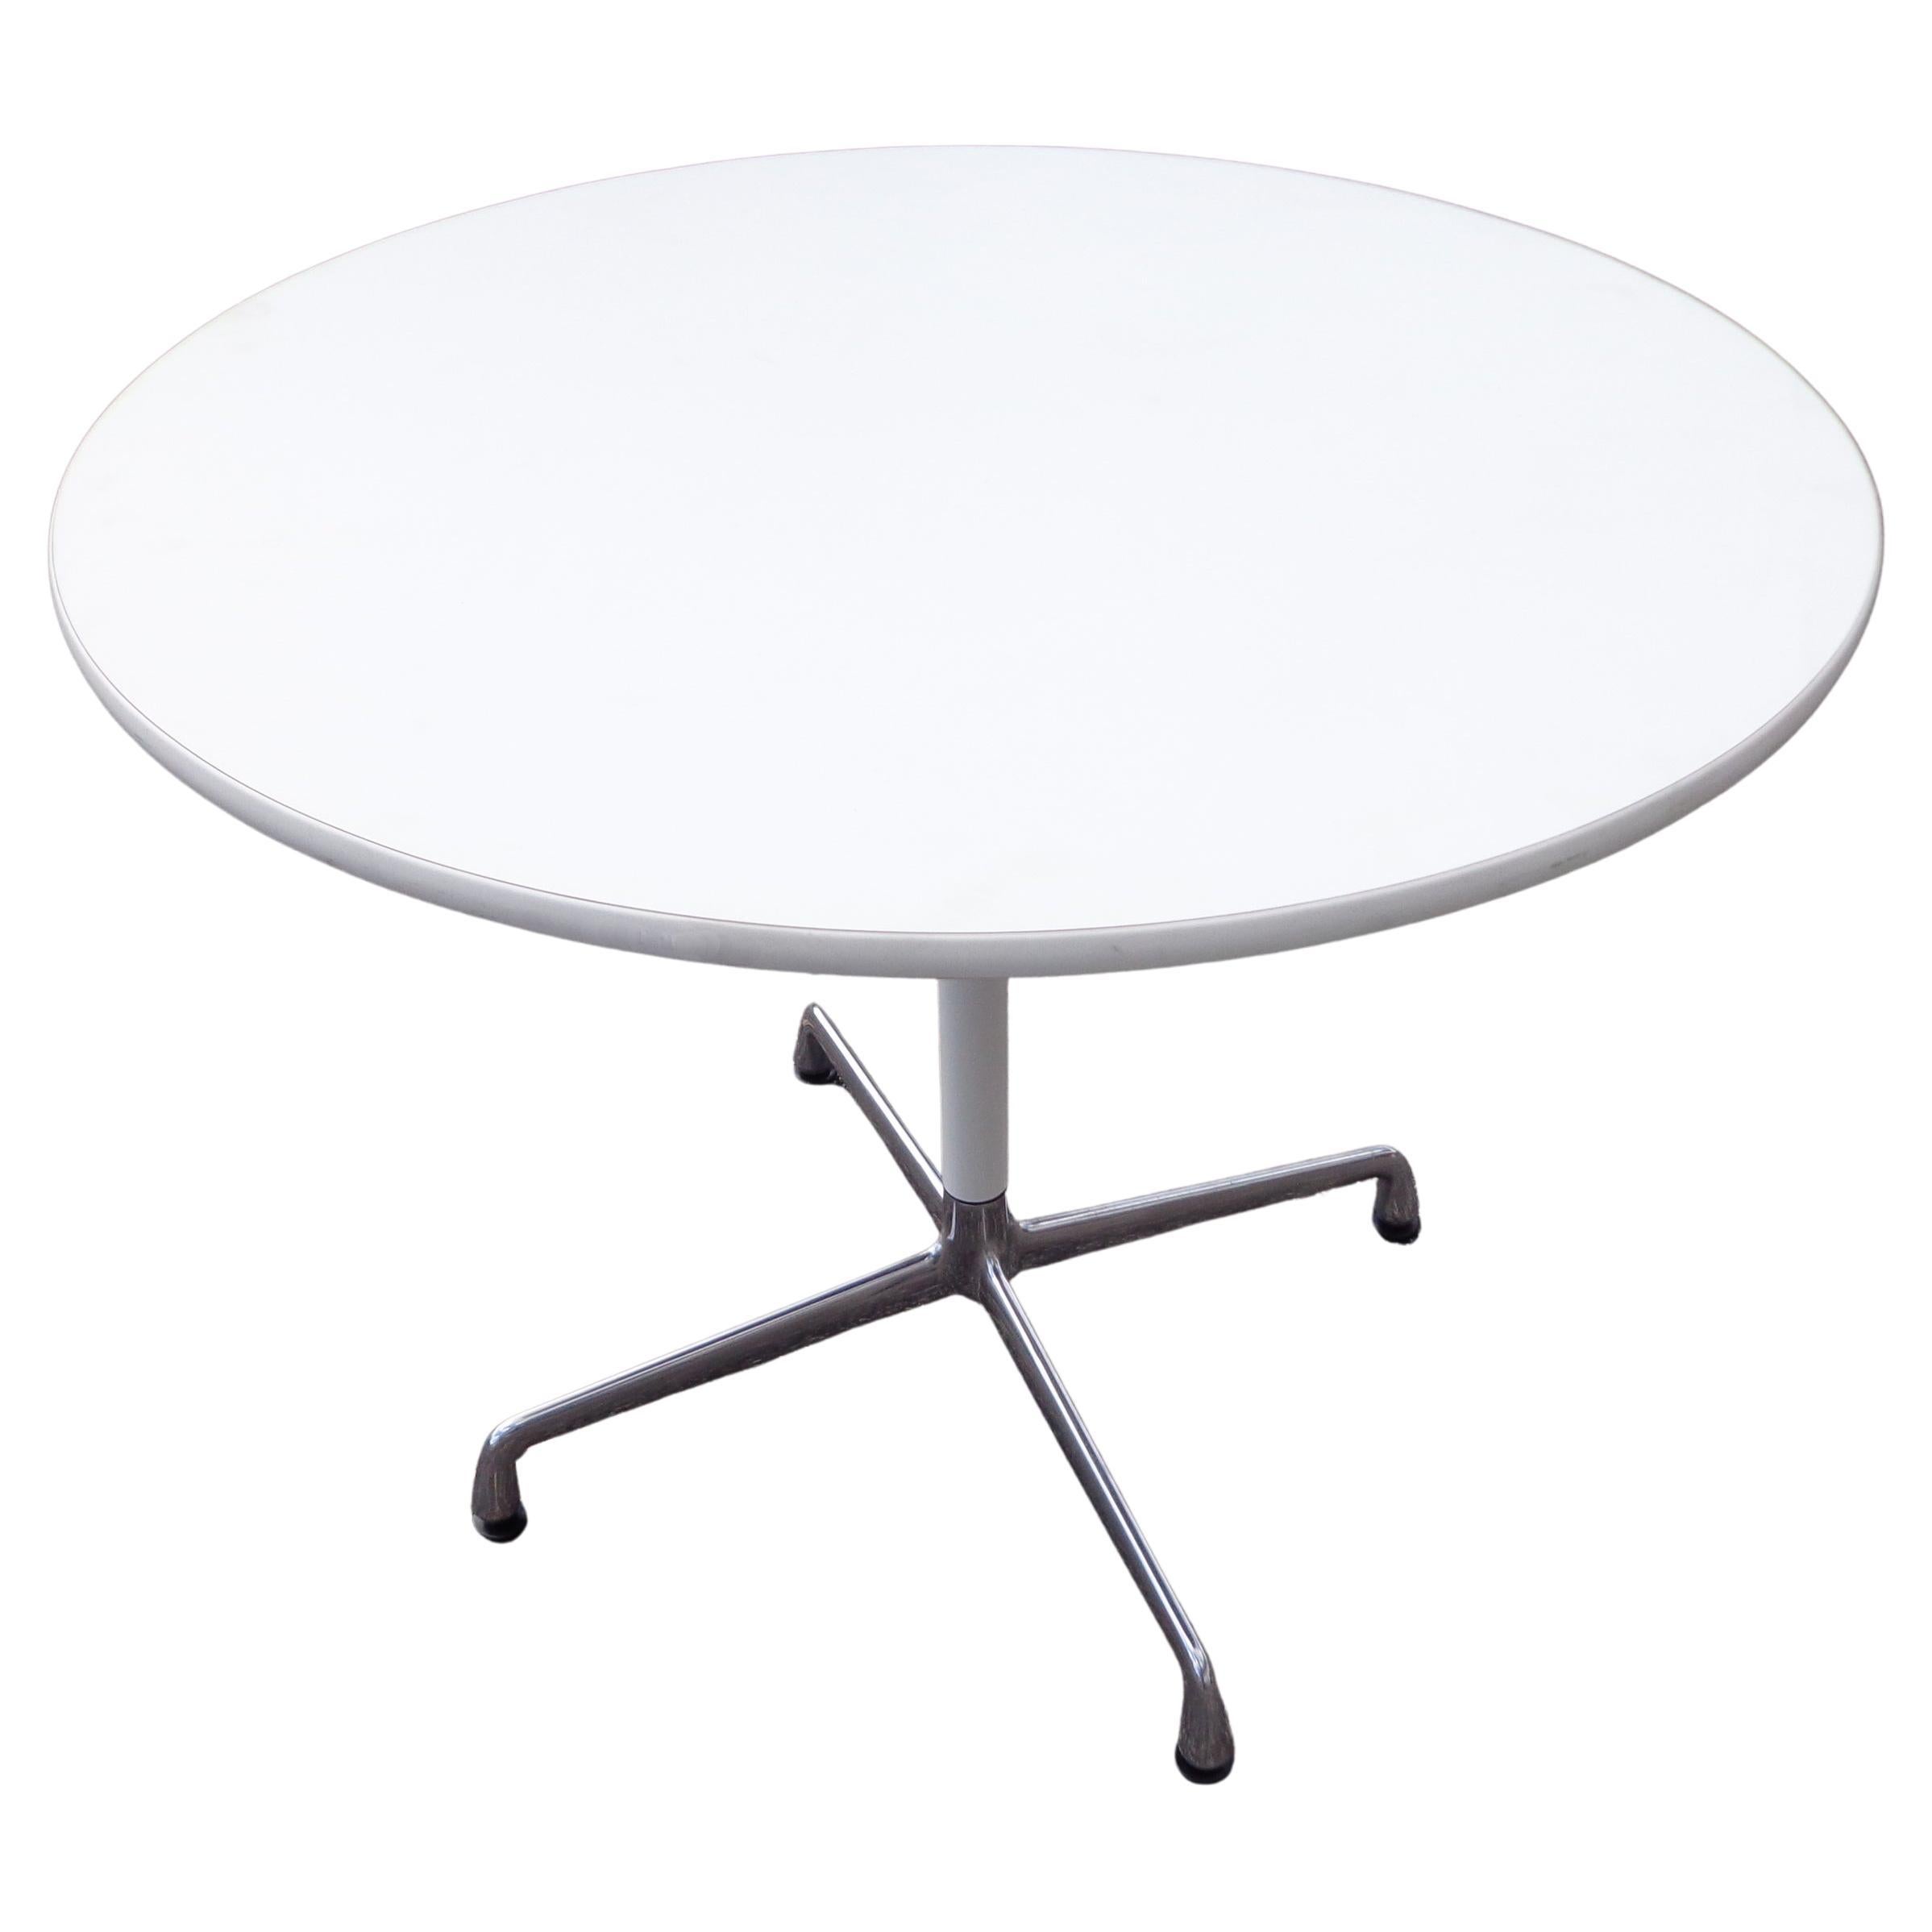 Charles Eames for Herman Miller Dining Table